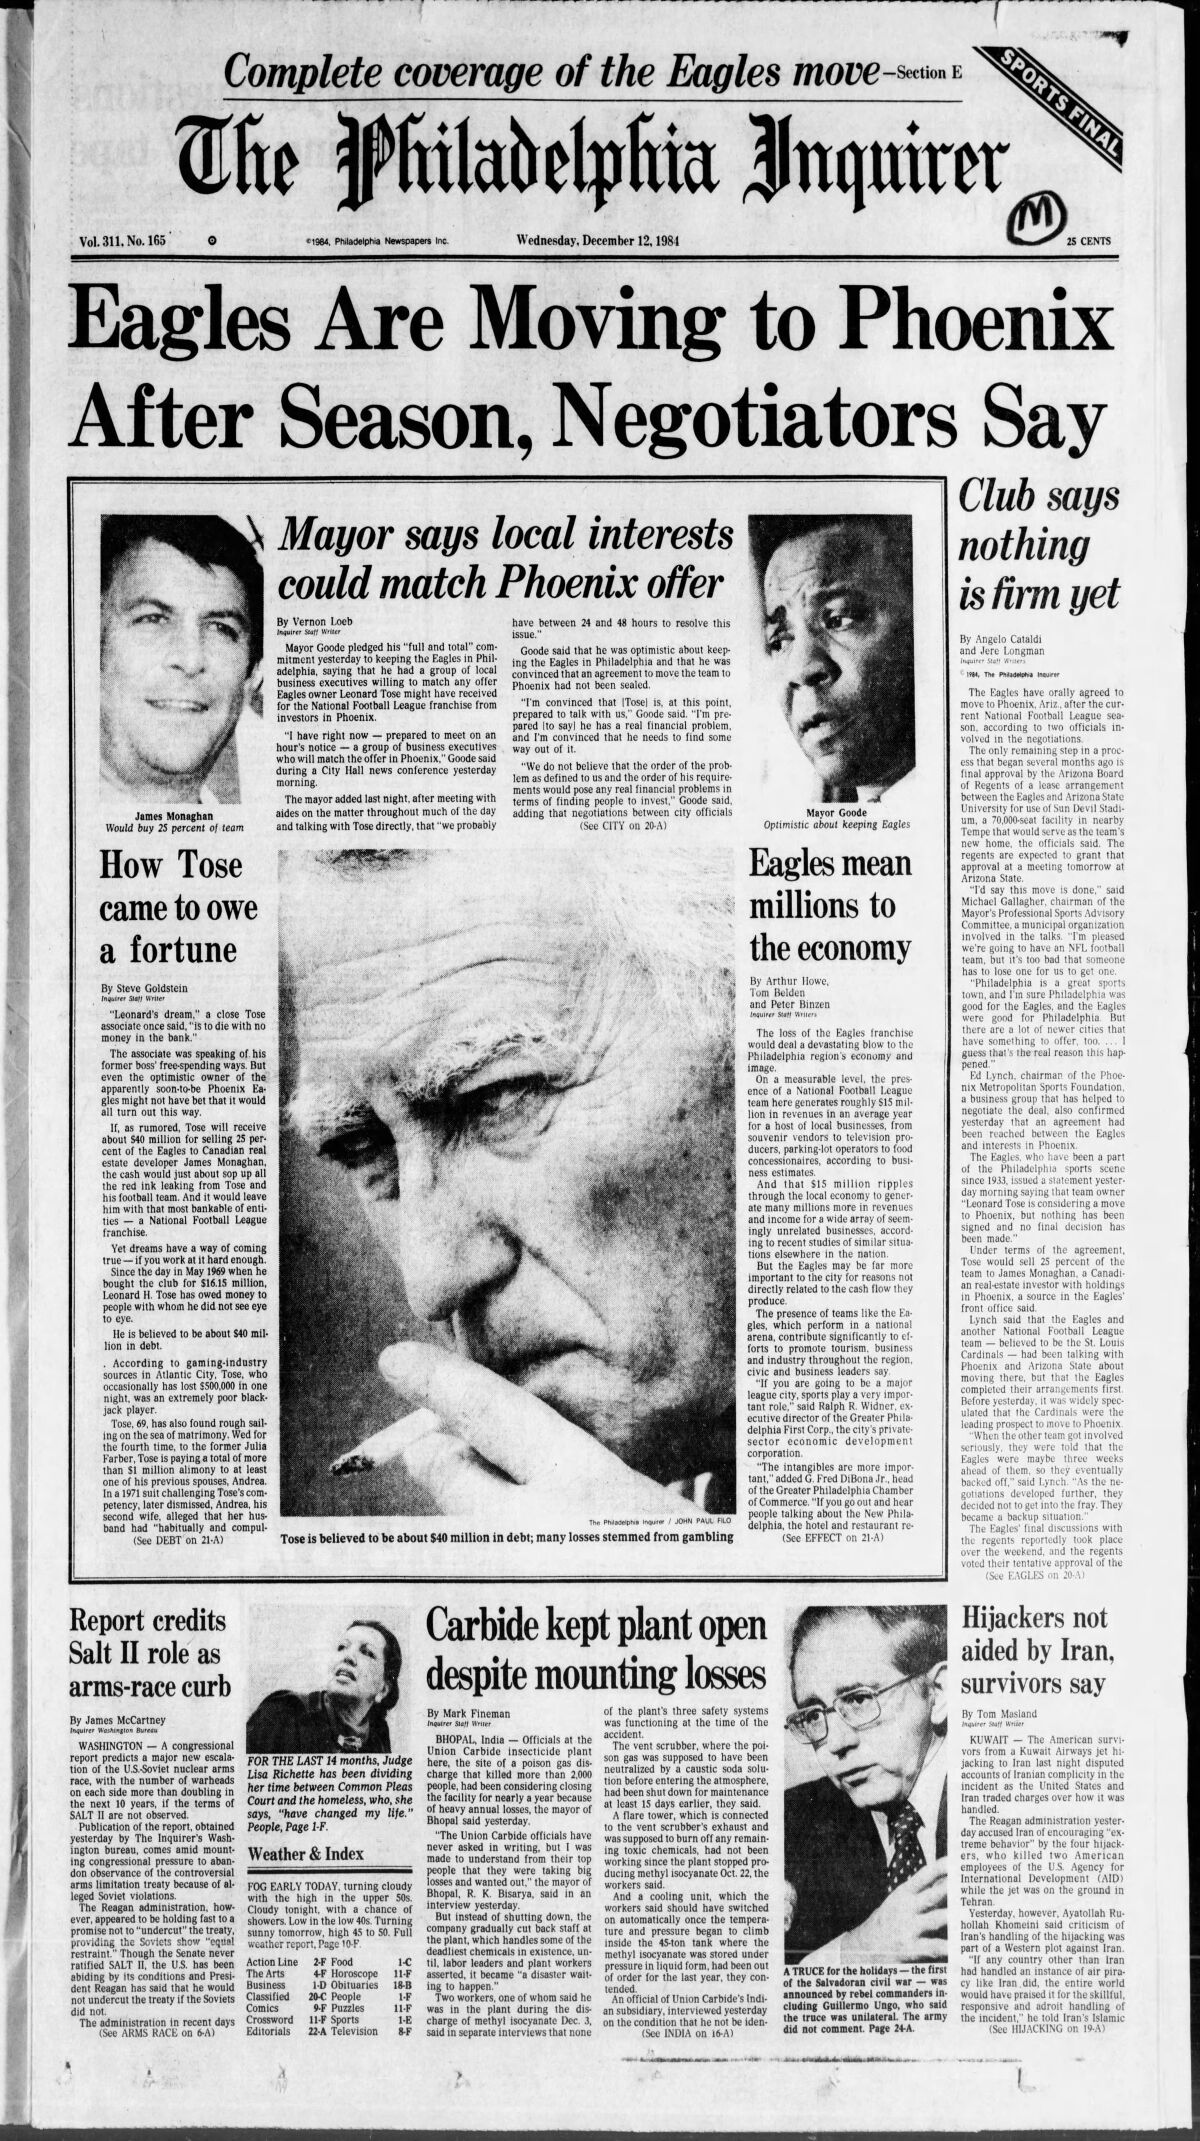 The Philadelphia Eagles' potential move to Phoenix was front-page news for the Philadelphia Inquirer on Dec. 12, 1984.